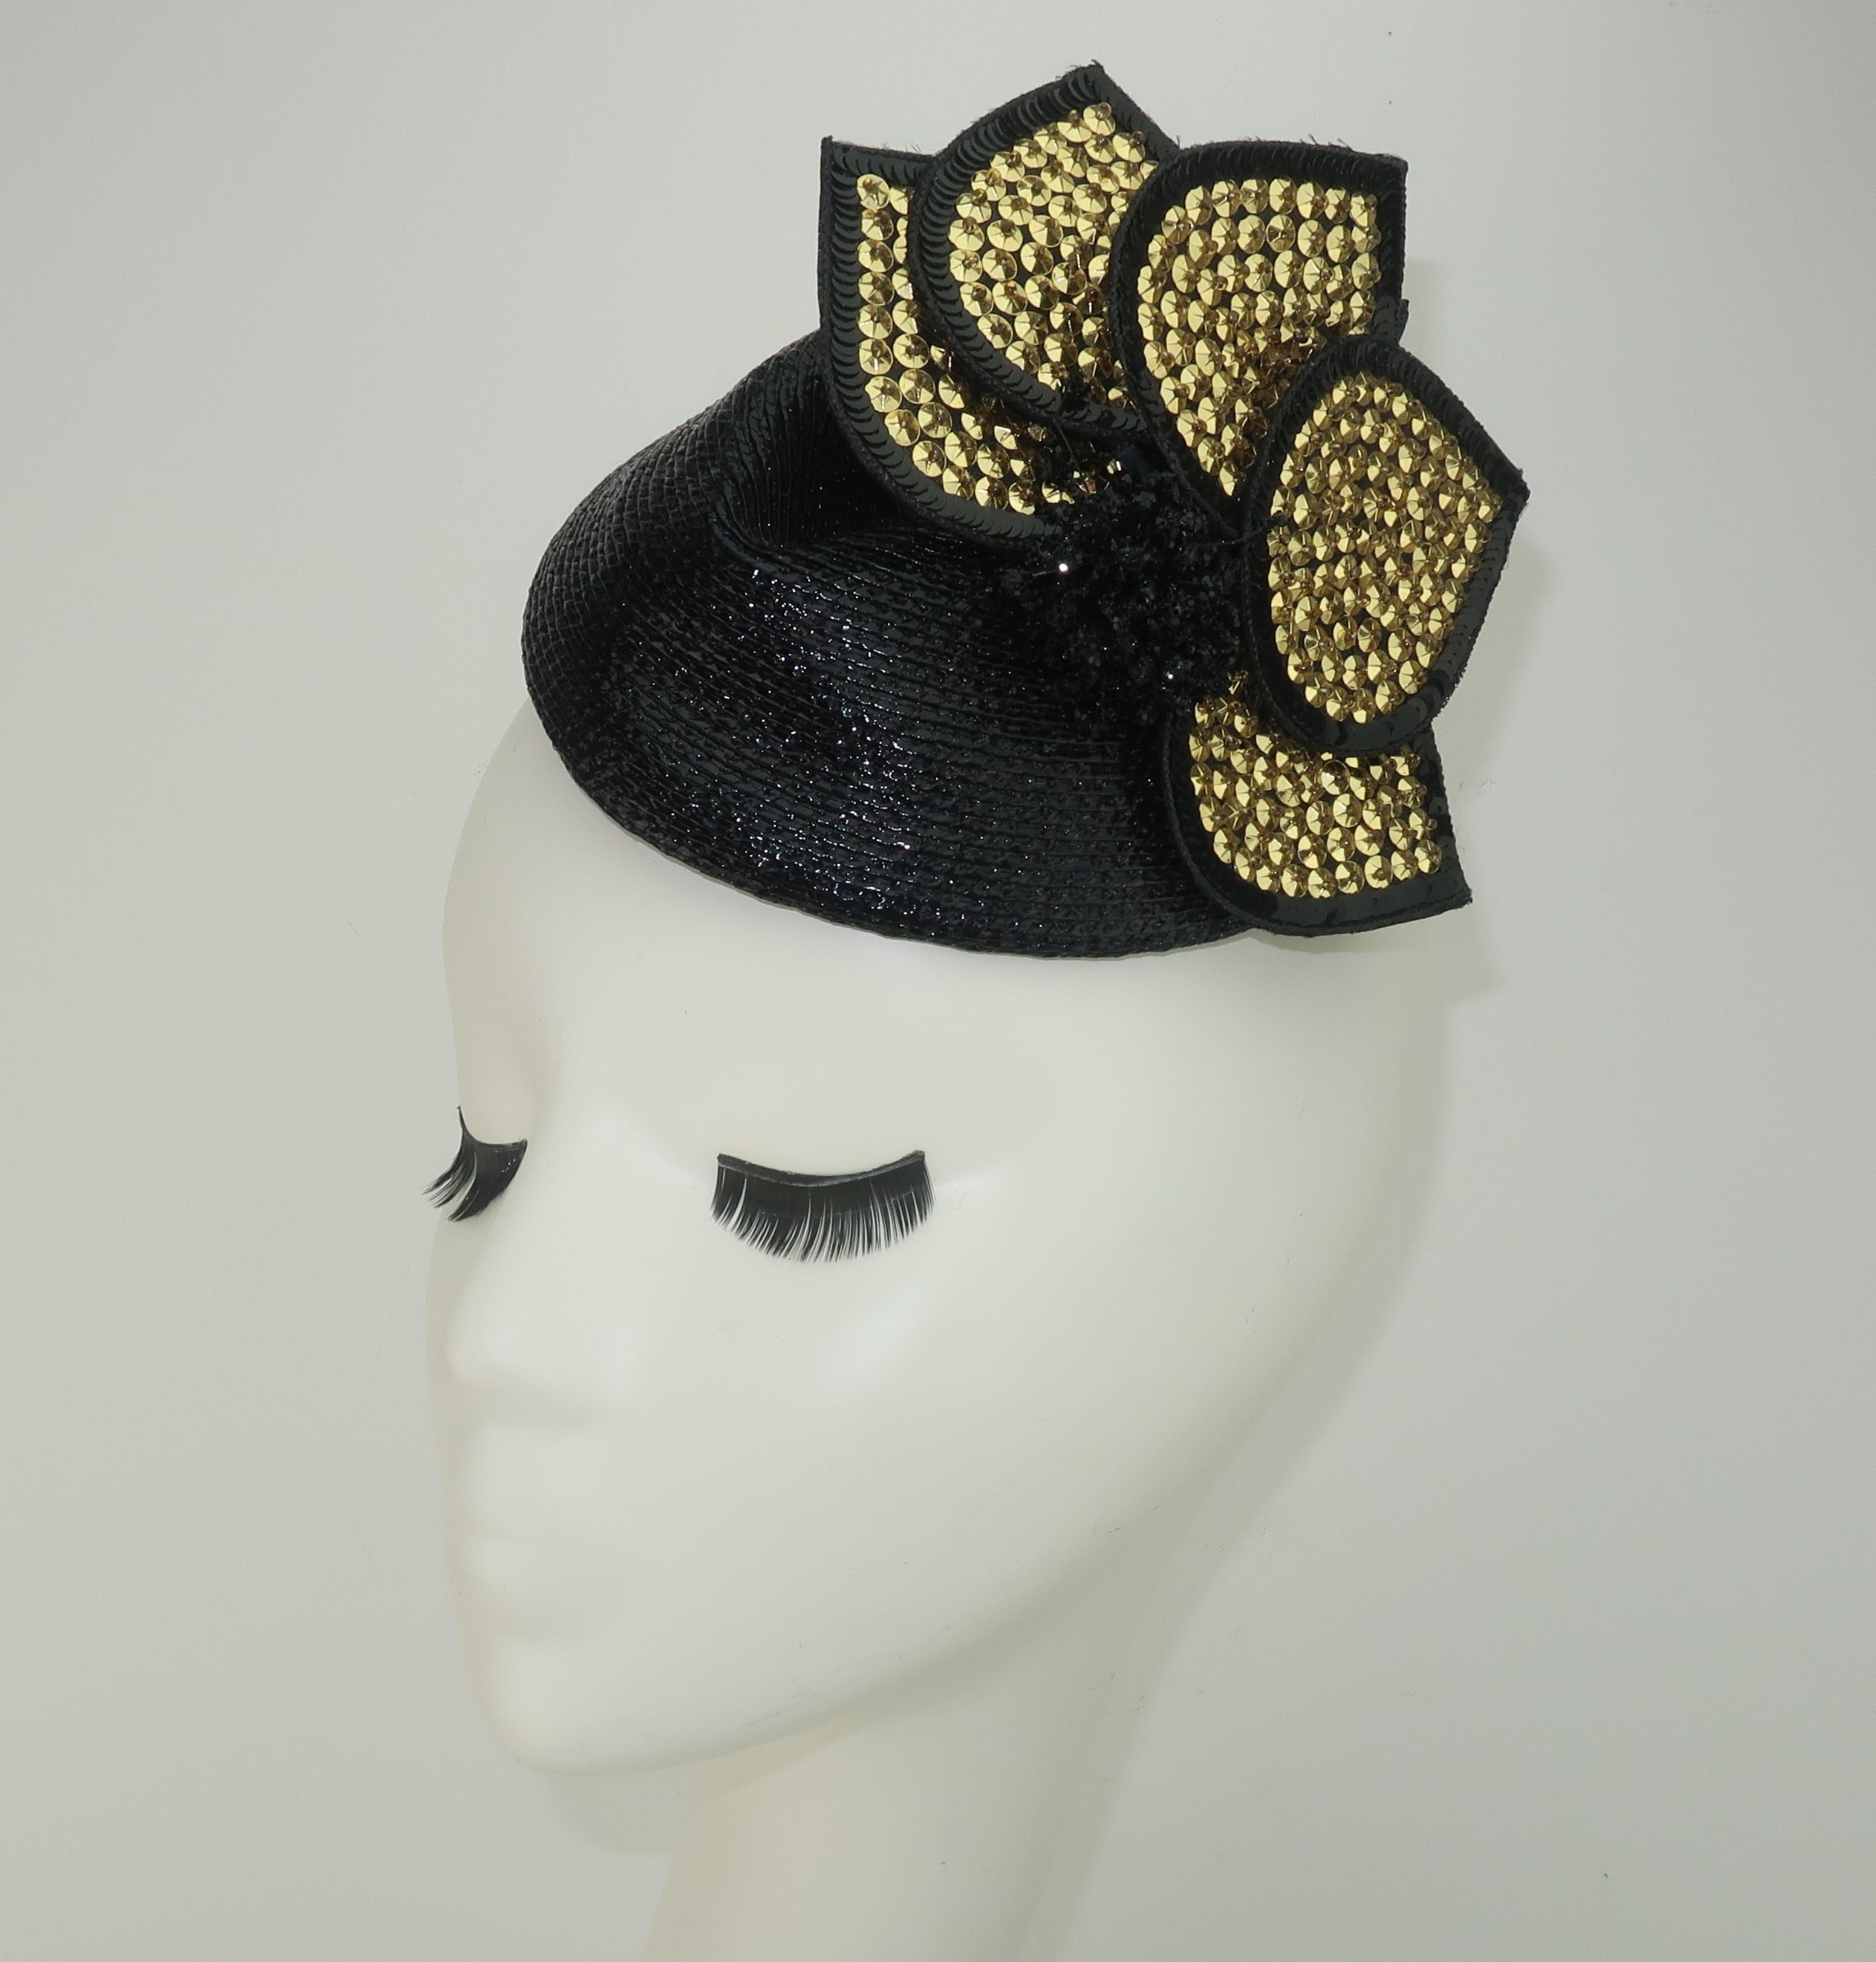 A black straw fascinator style hat with a removable gold sequin embellishment by Rosemary Peck.  Two combs are attached on the inner rim for anchoring the topper in place.  The removable embellishment could also be worn as a brooch.  From the living